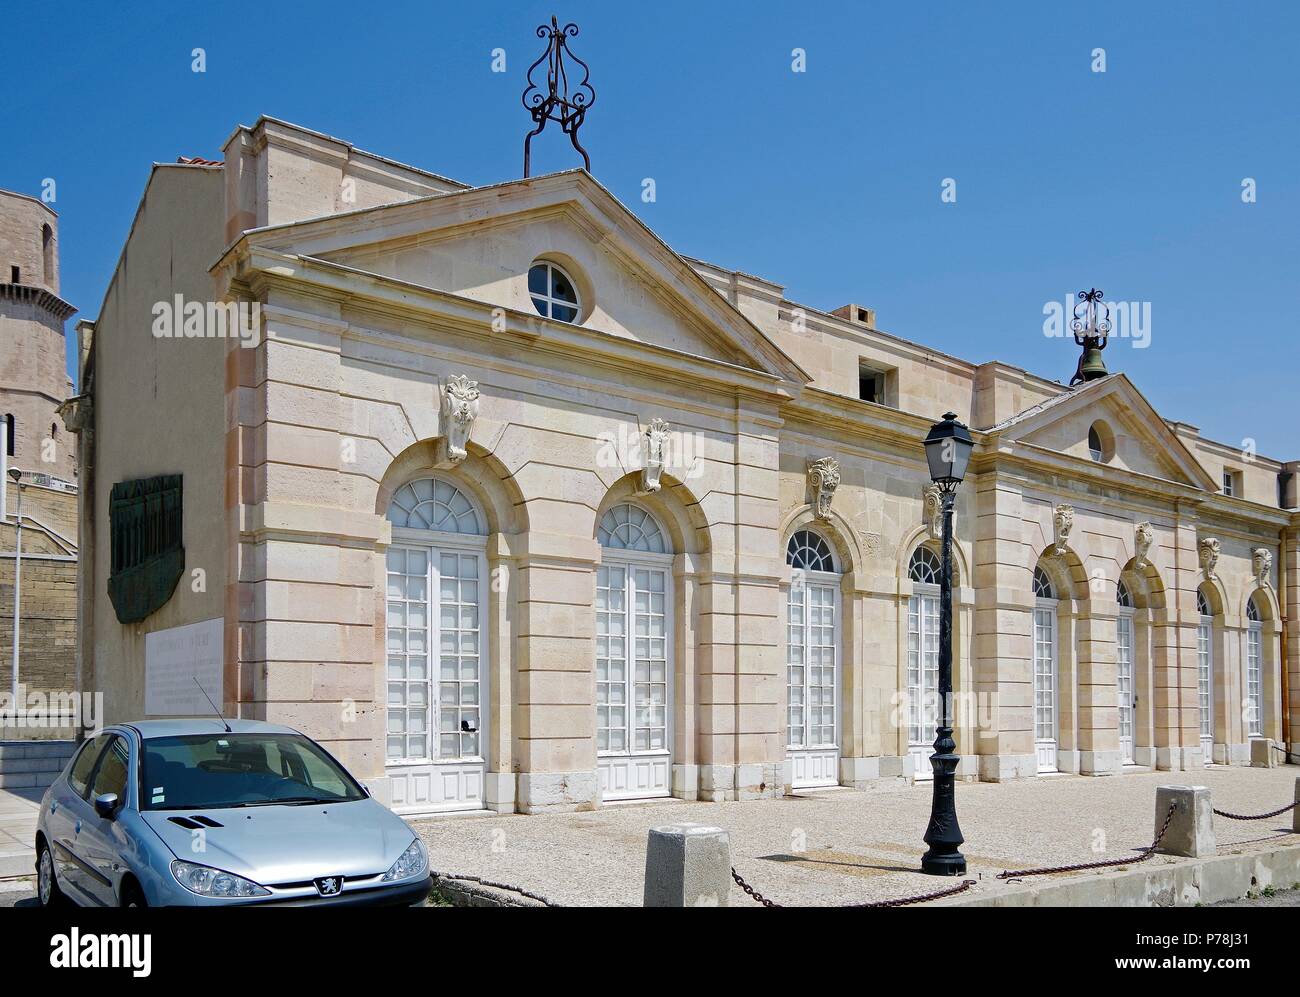 One of the two near identical buildings near the entry to the Old Port, Marseille, an elegant neo classical building Stock Photo